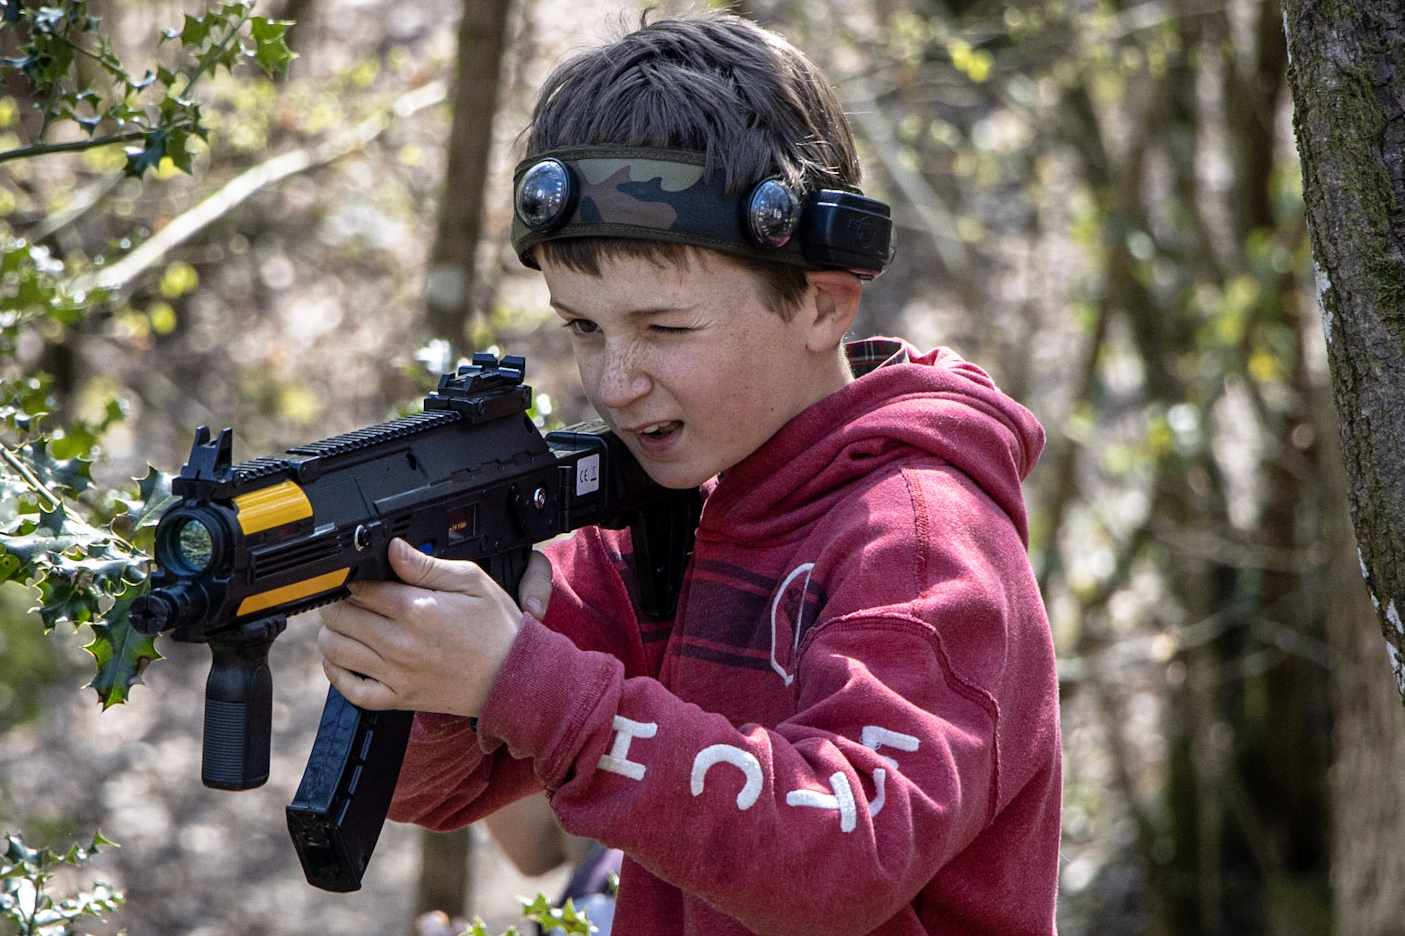 A boy playing the laser tag game, BattleZone